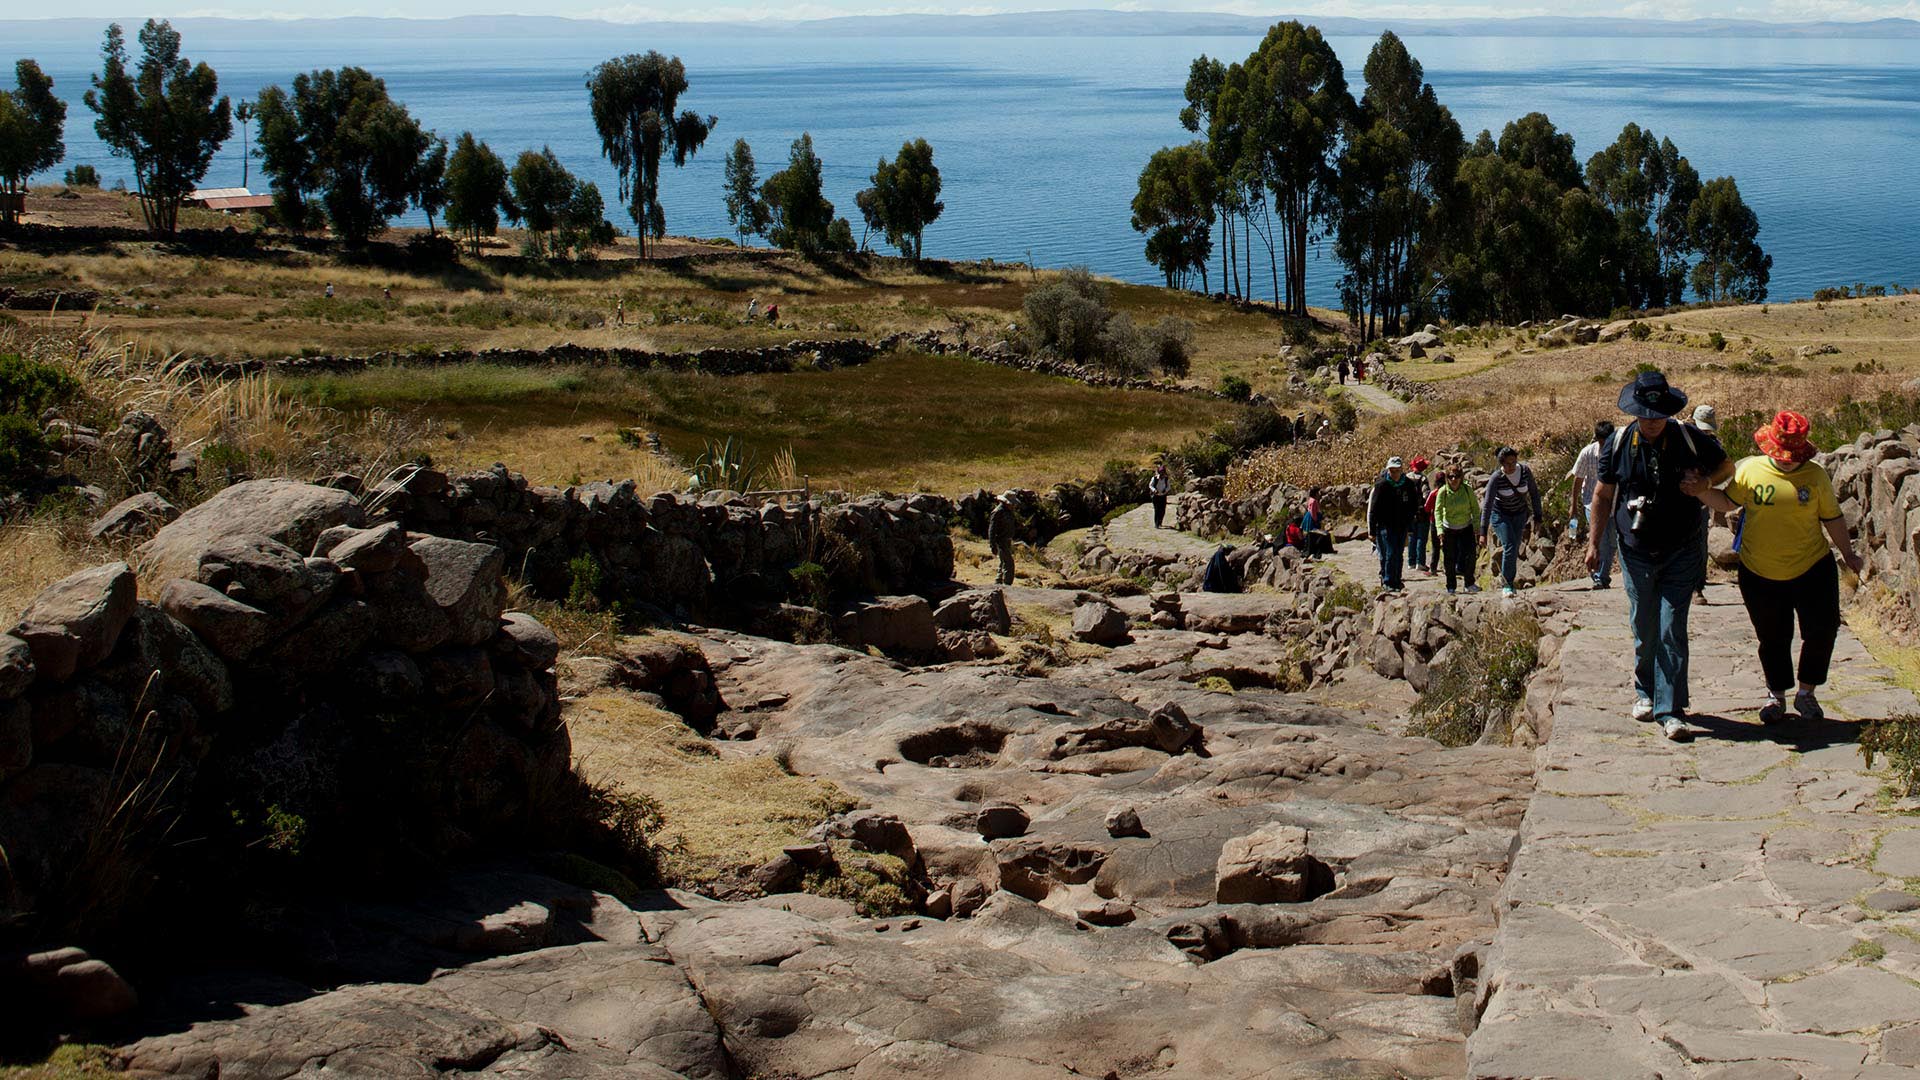 Visit the islands of Lake Titicaca